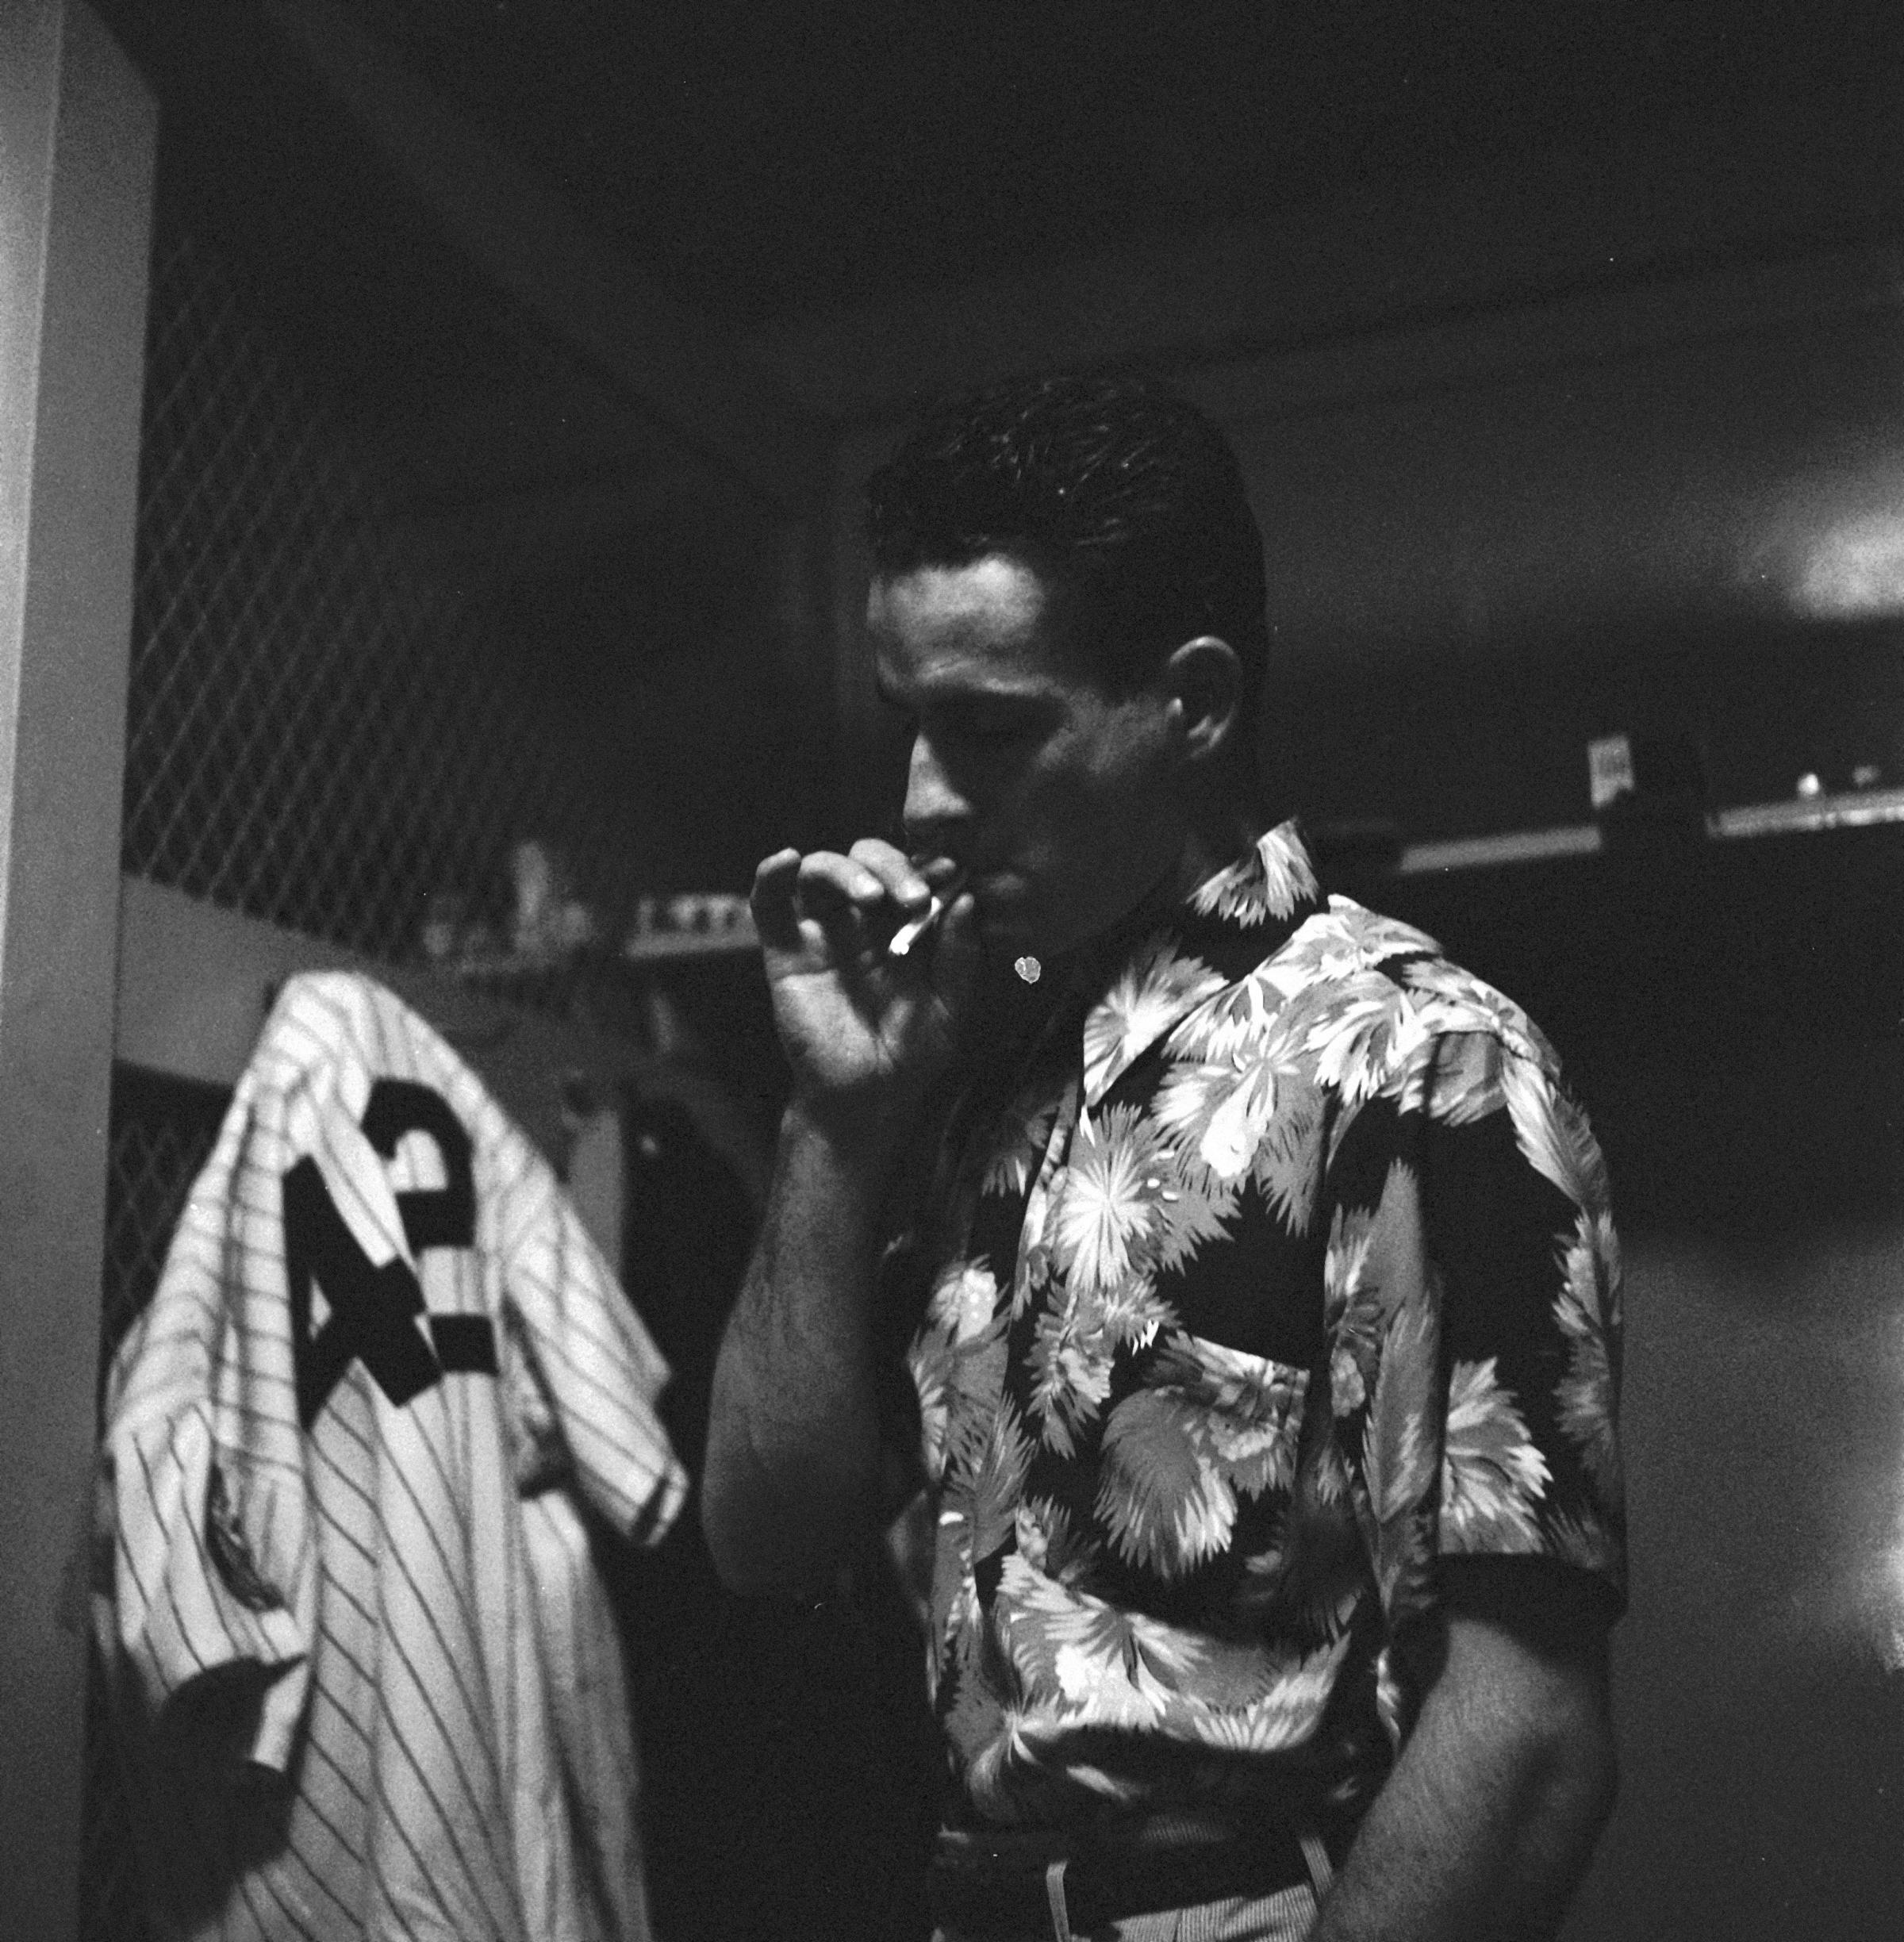 Jerry Coleman takes a long drag from a cigarette in the locker room of Yankee Stadium, New York, New York, April 1952, after learning that he has been called to active military duty for the Korean War. Coleman was a Marine pilot who had previously served in World War II.